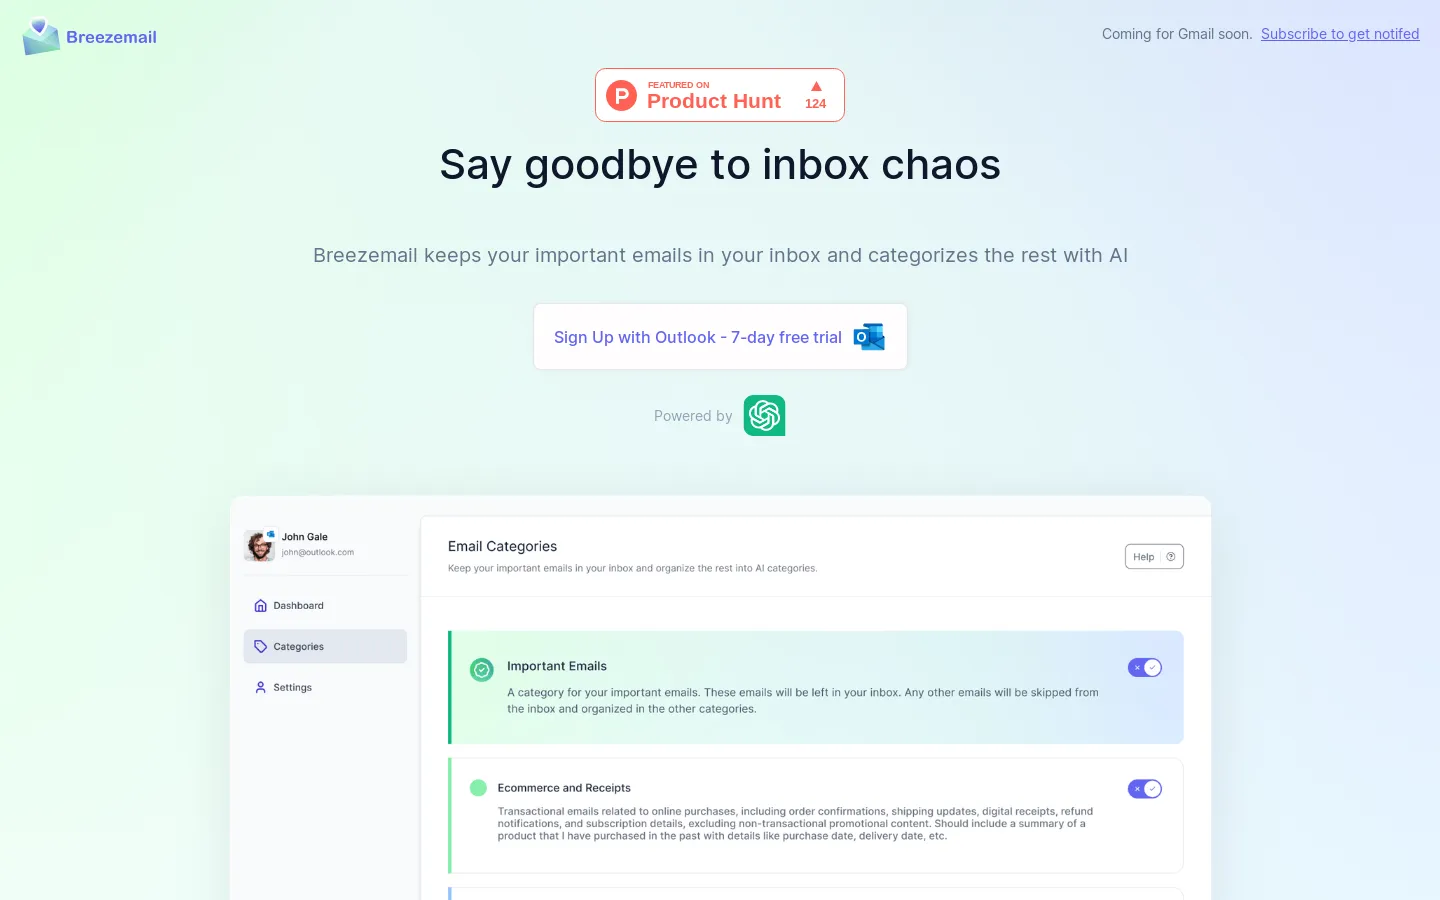 Breezemail - Organize your inbox with AI categories